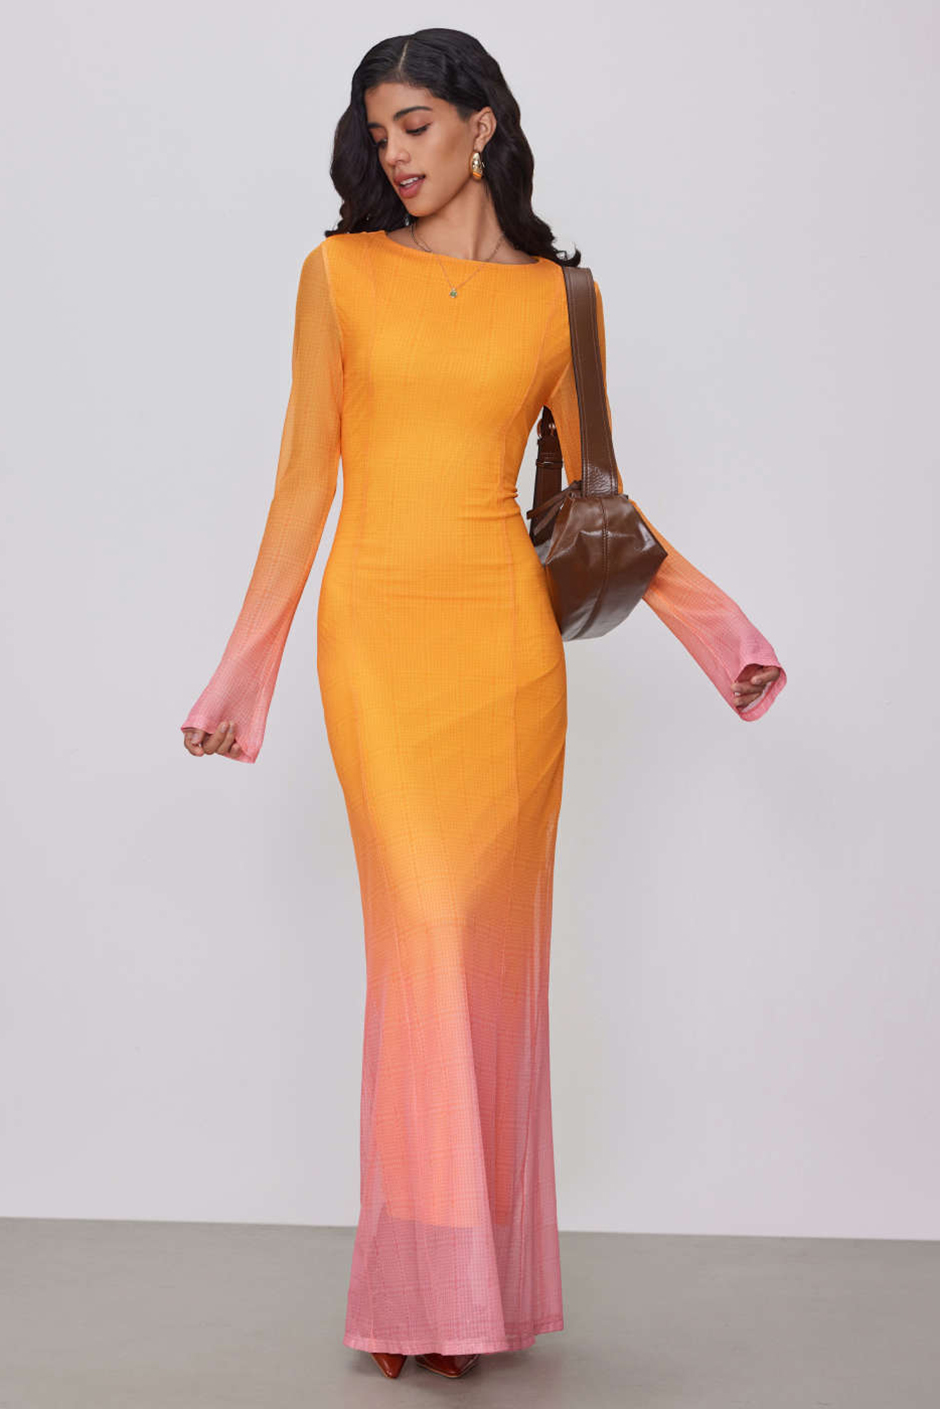 Autumn wedding guest dress from Cider with gradient sunset tones 